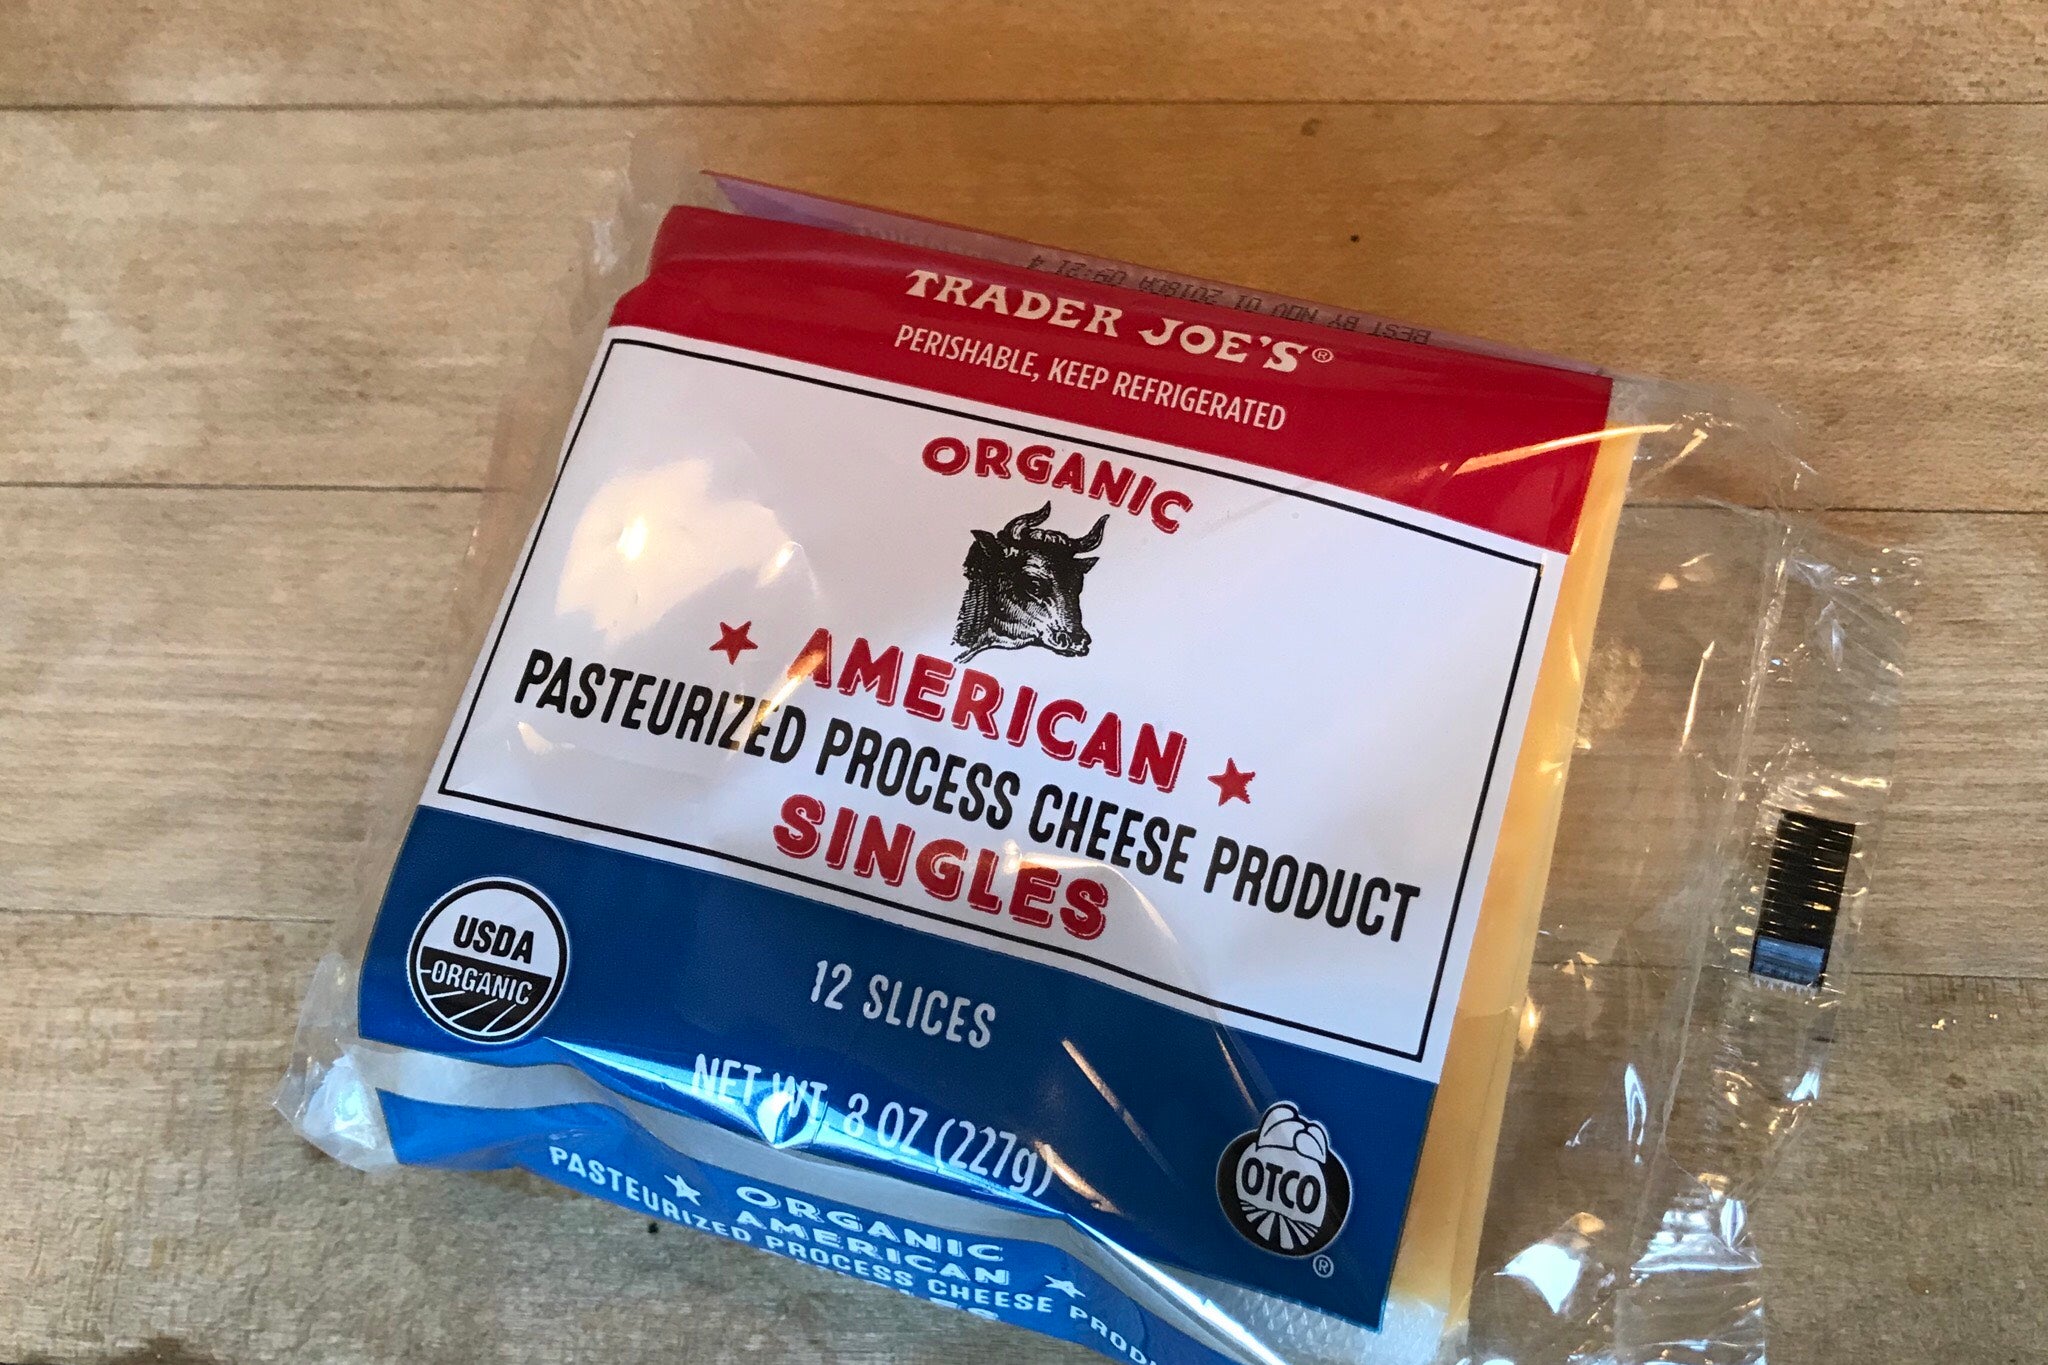 American pasteurized process cheese product.